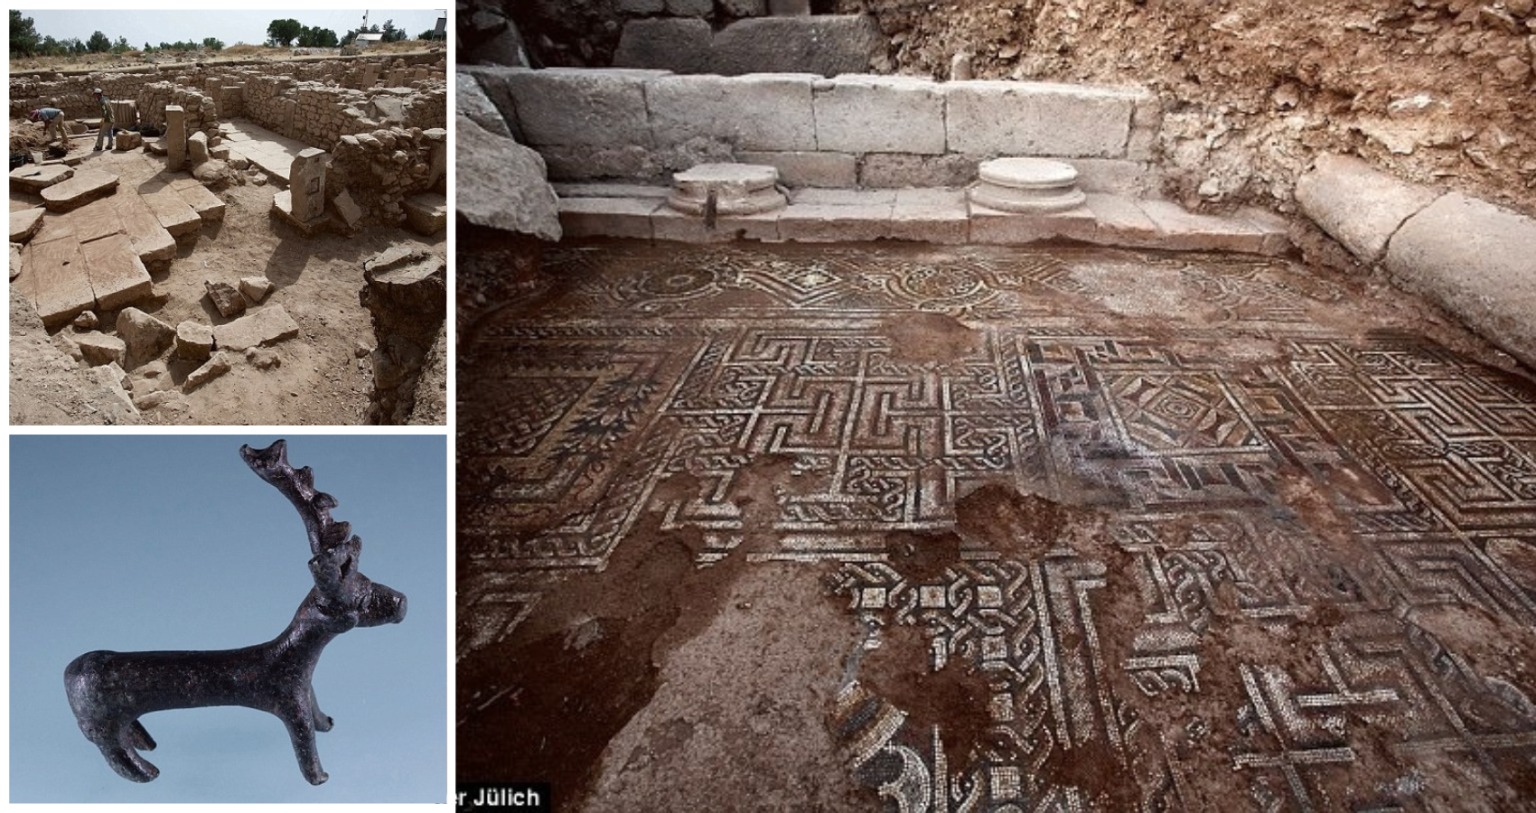 Mosaic Floor From Roman Syria Unearthed in Turkey